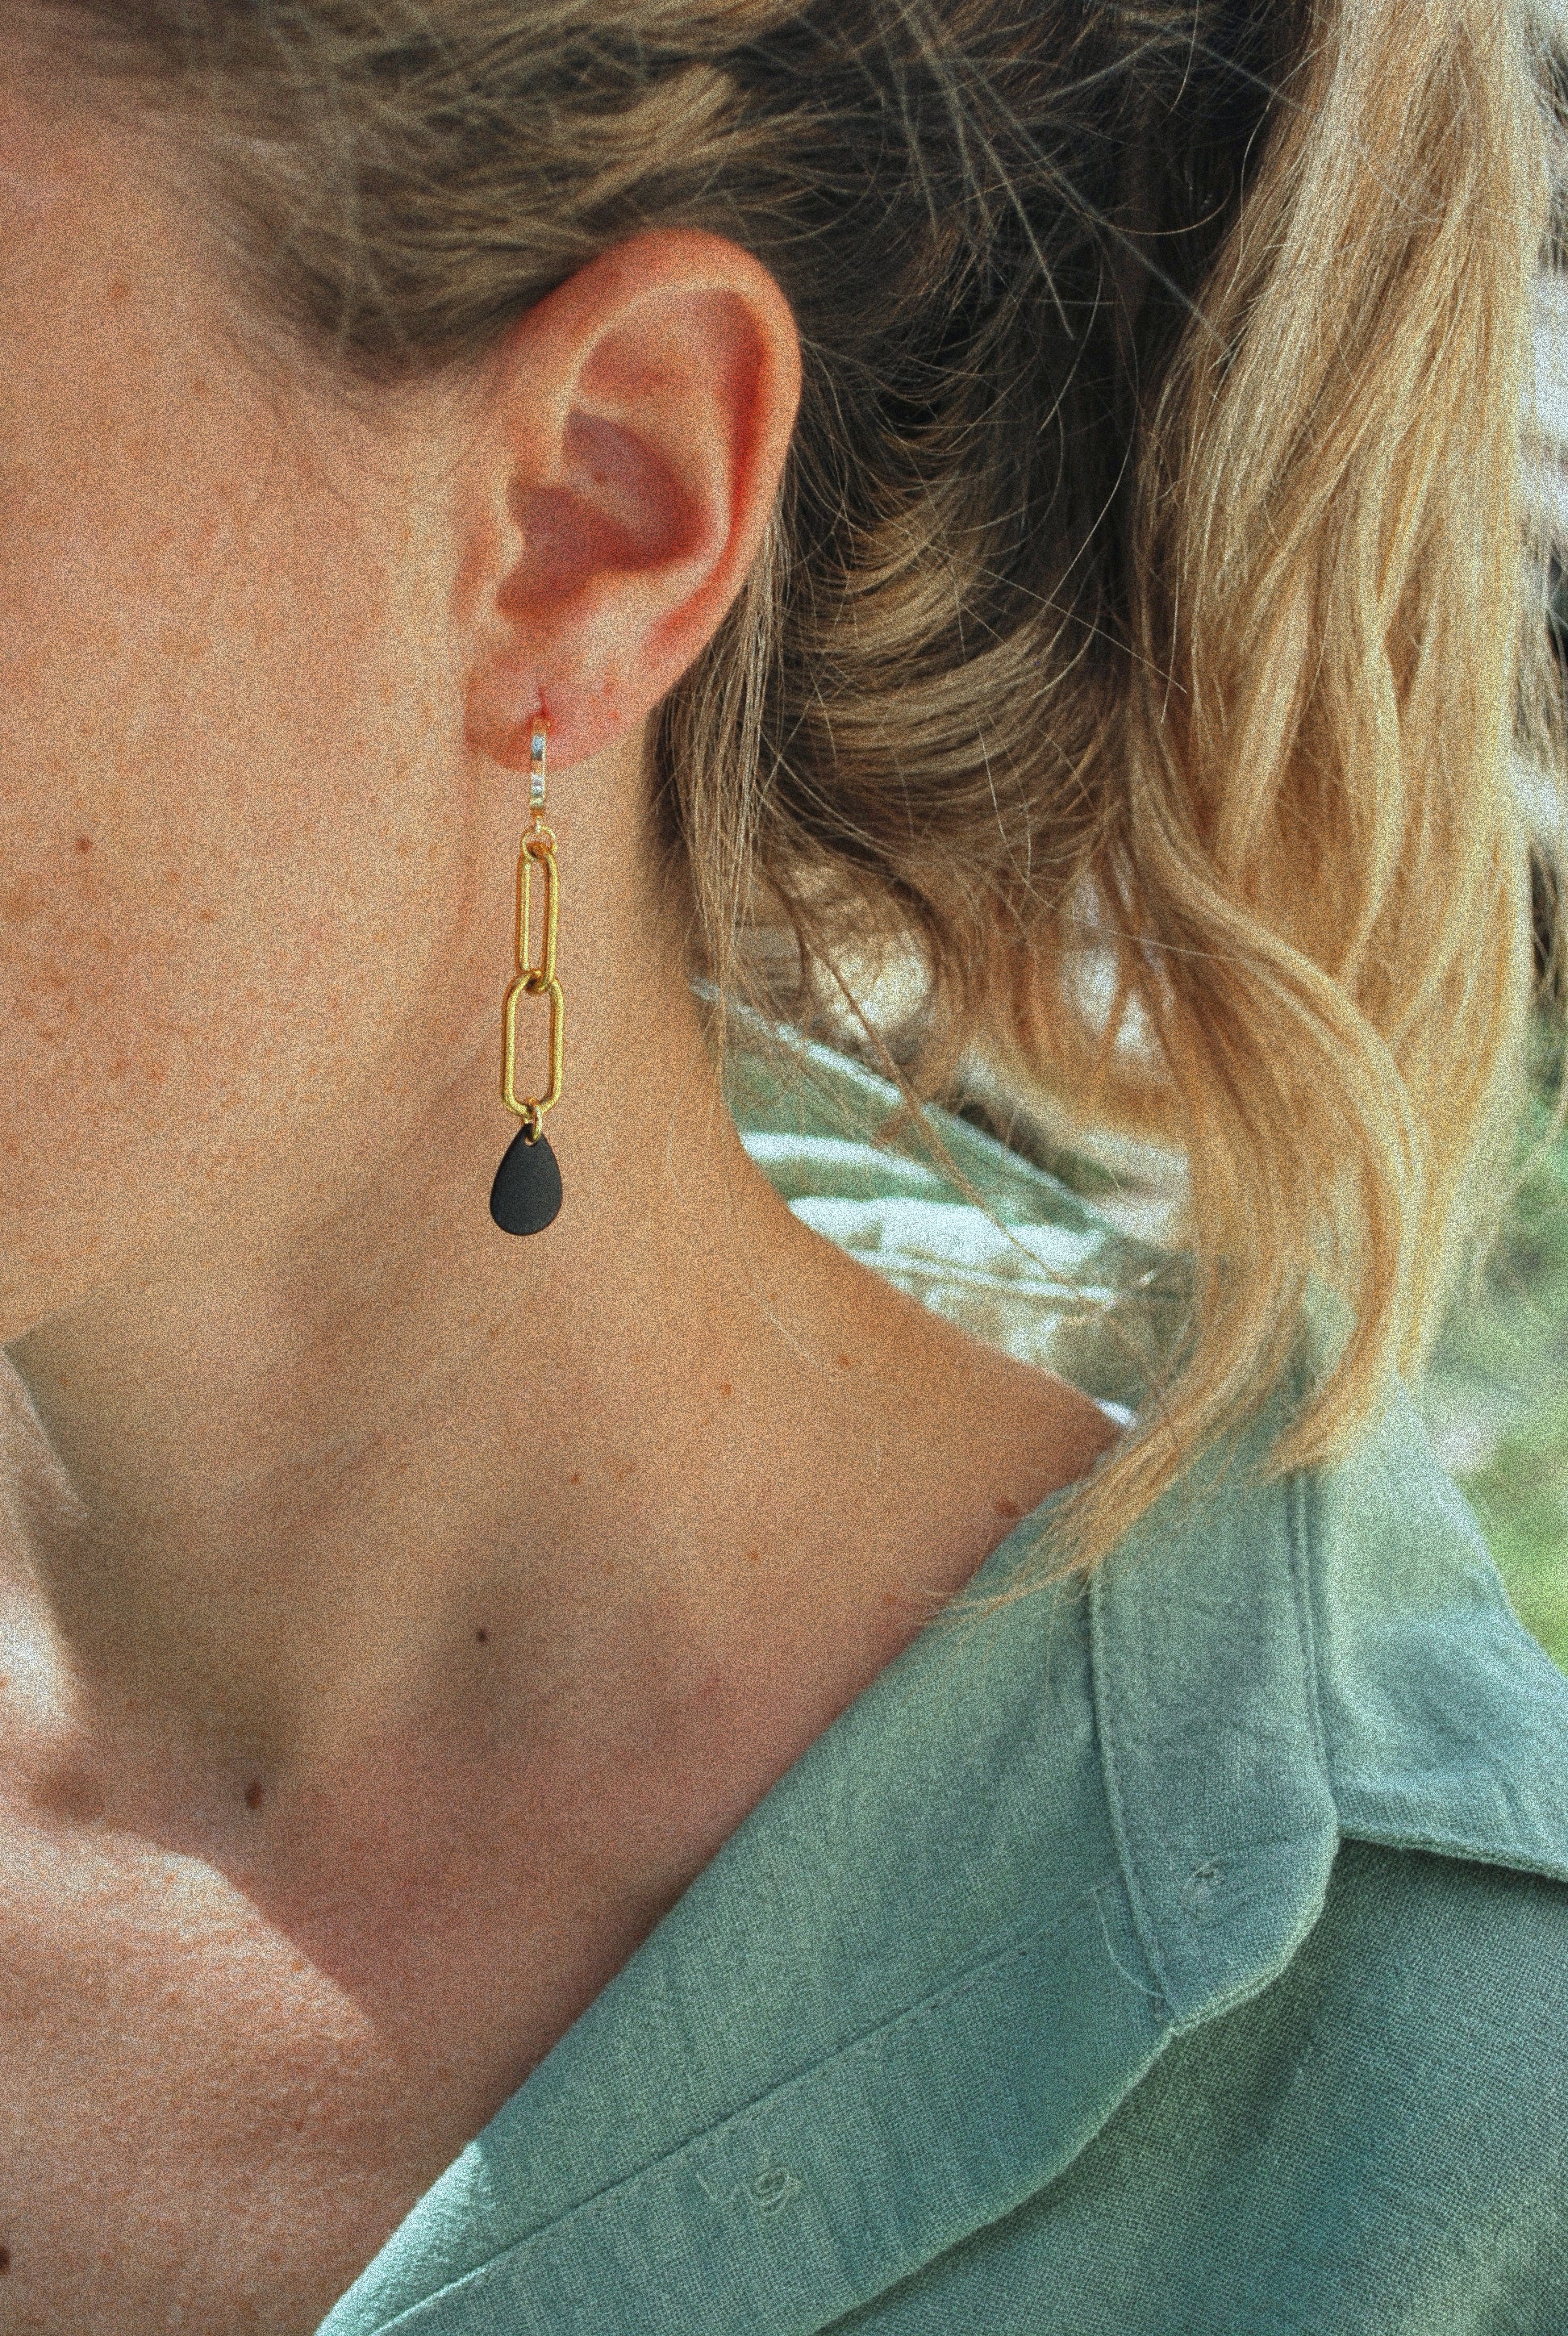 Blanchette Gold hoop earrings and a drop